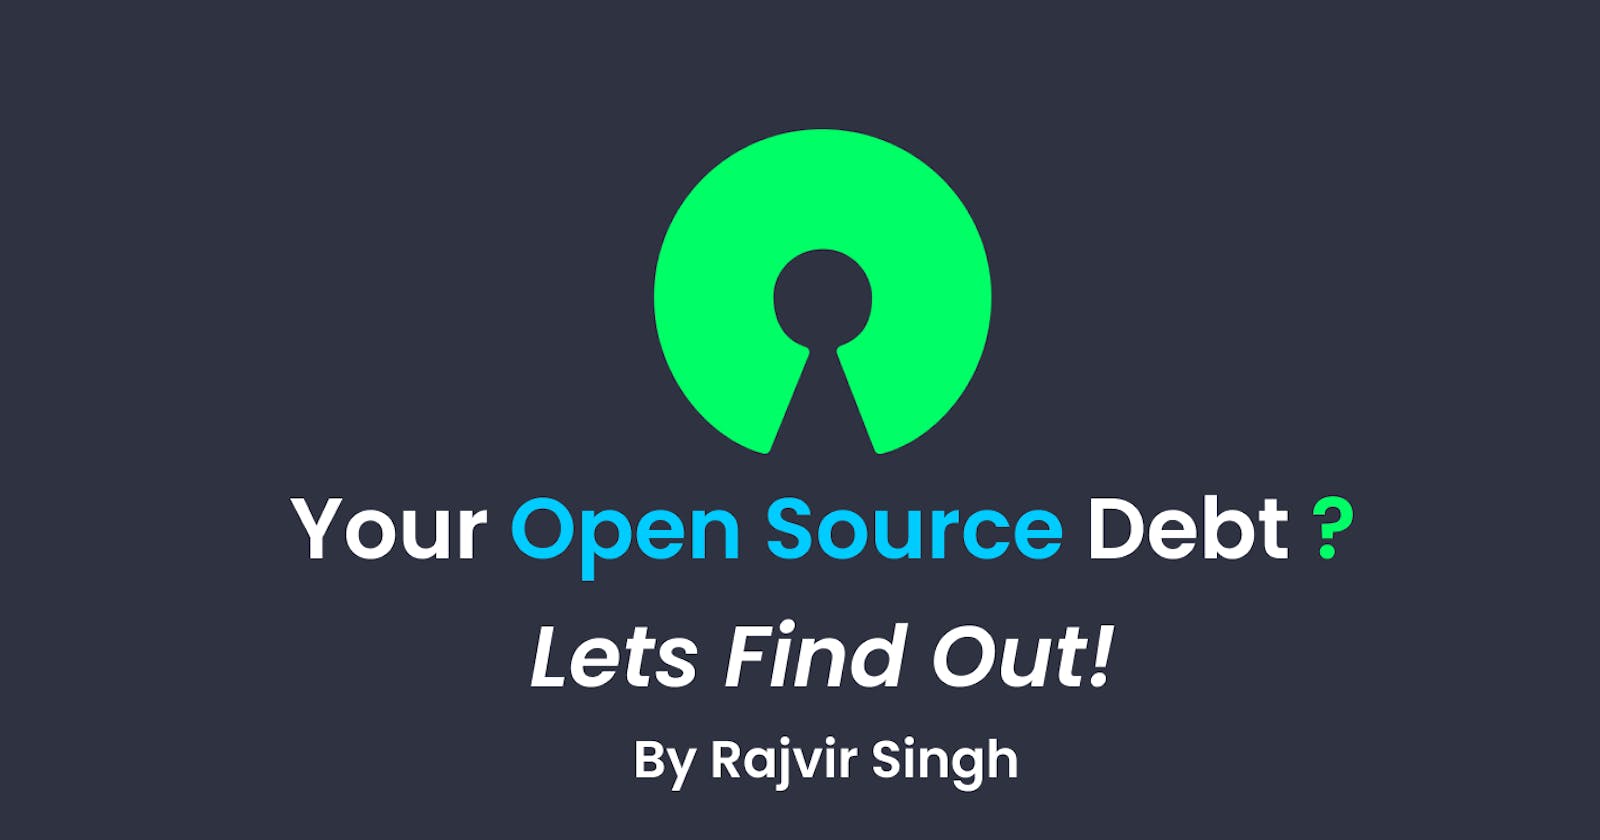 What is Open Source Debt? And How to repay it?